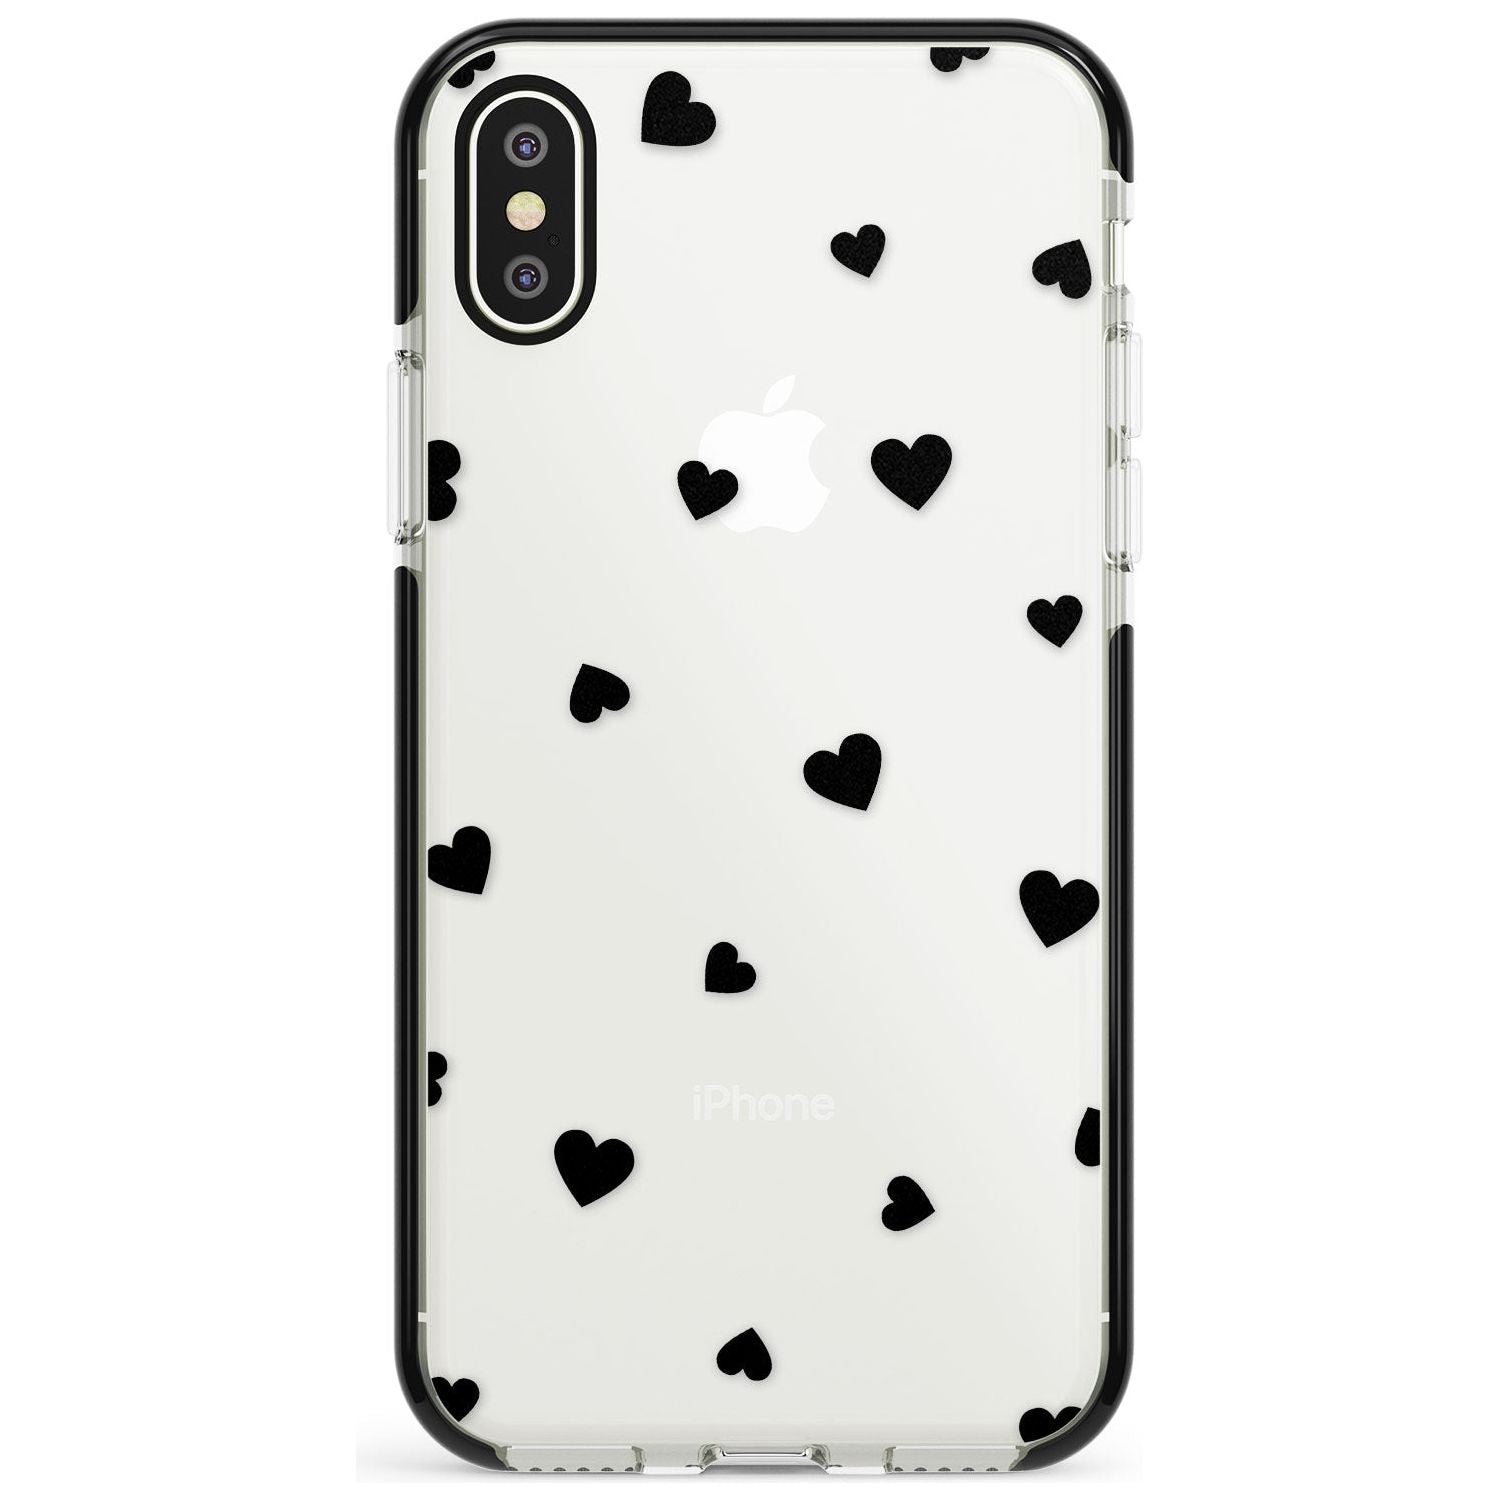 Black Hearts Pattern Black Impact Phone Case for iPhone X XS Max XR